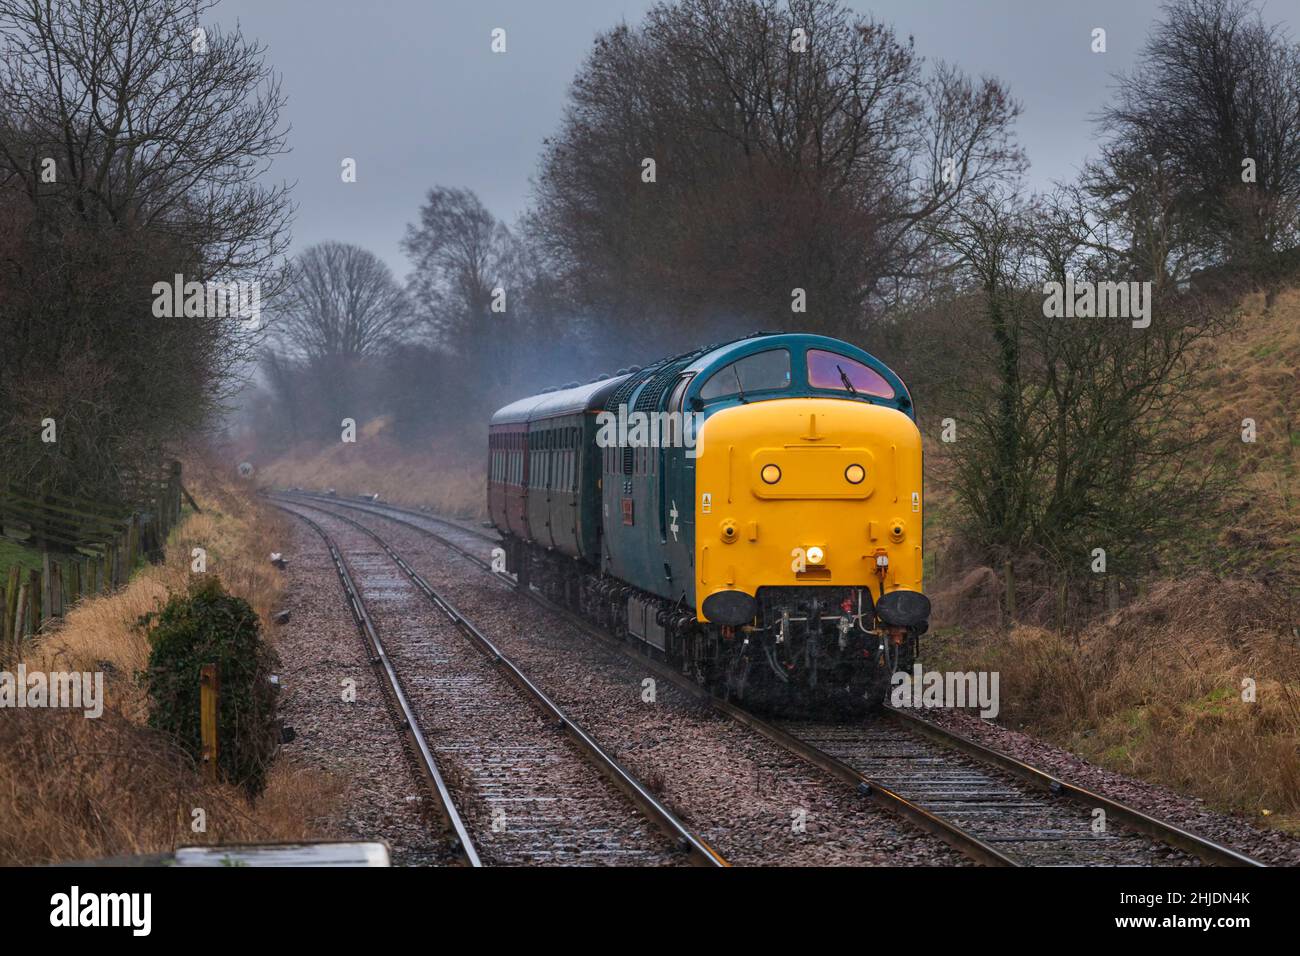 The national railway Museums class 55 deltic locomotive 55002 on the little north western railway line with a west coast railways empty stock train Stock Photo